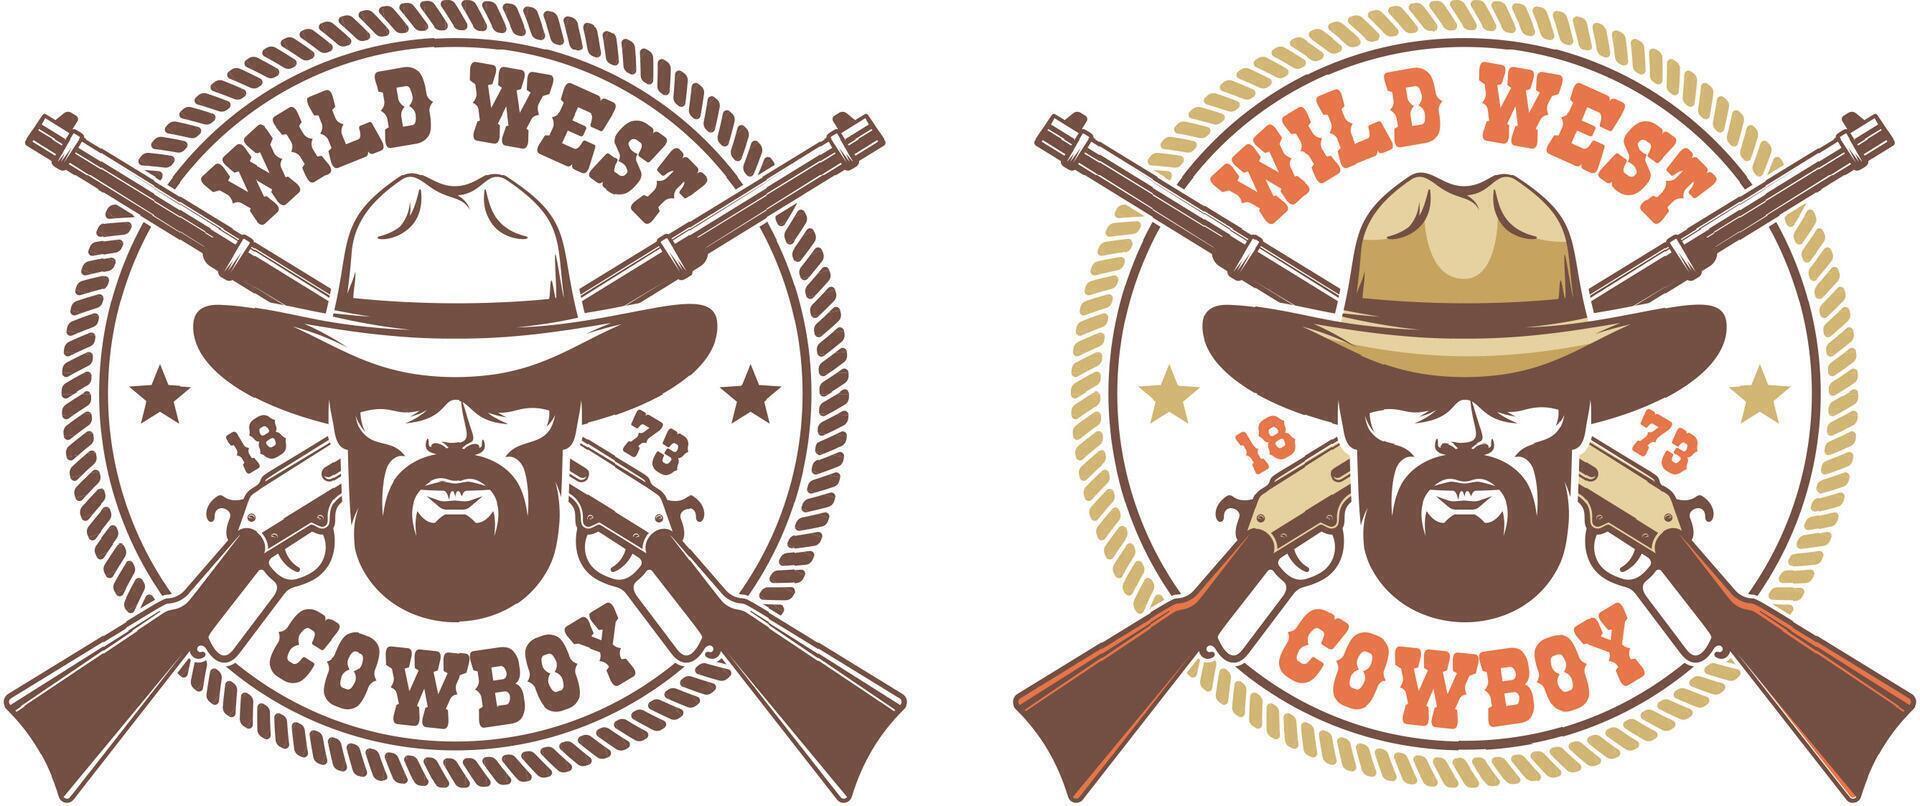 Wild west retro logo - cowboy in hat with crossed guns winchesters vector